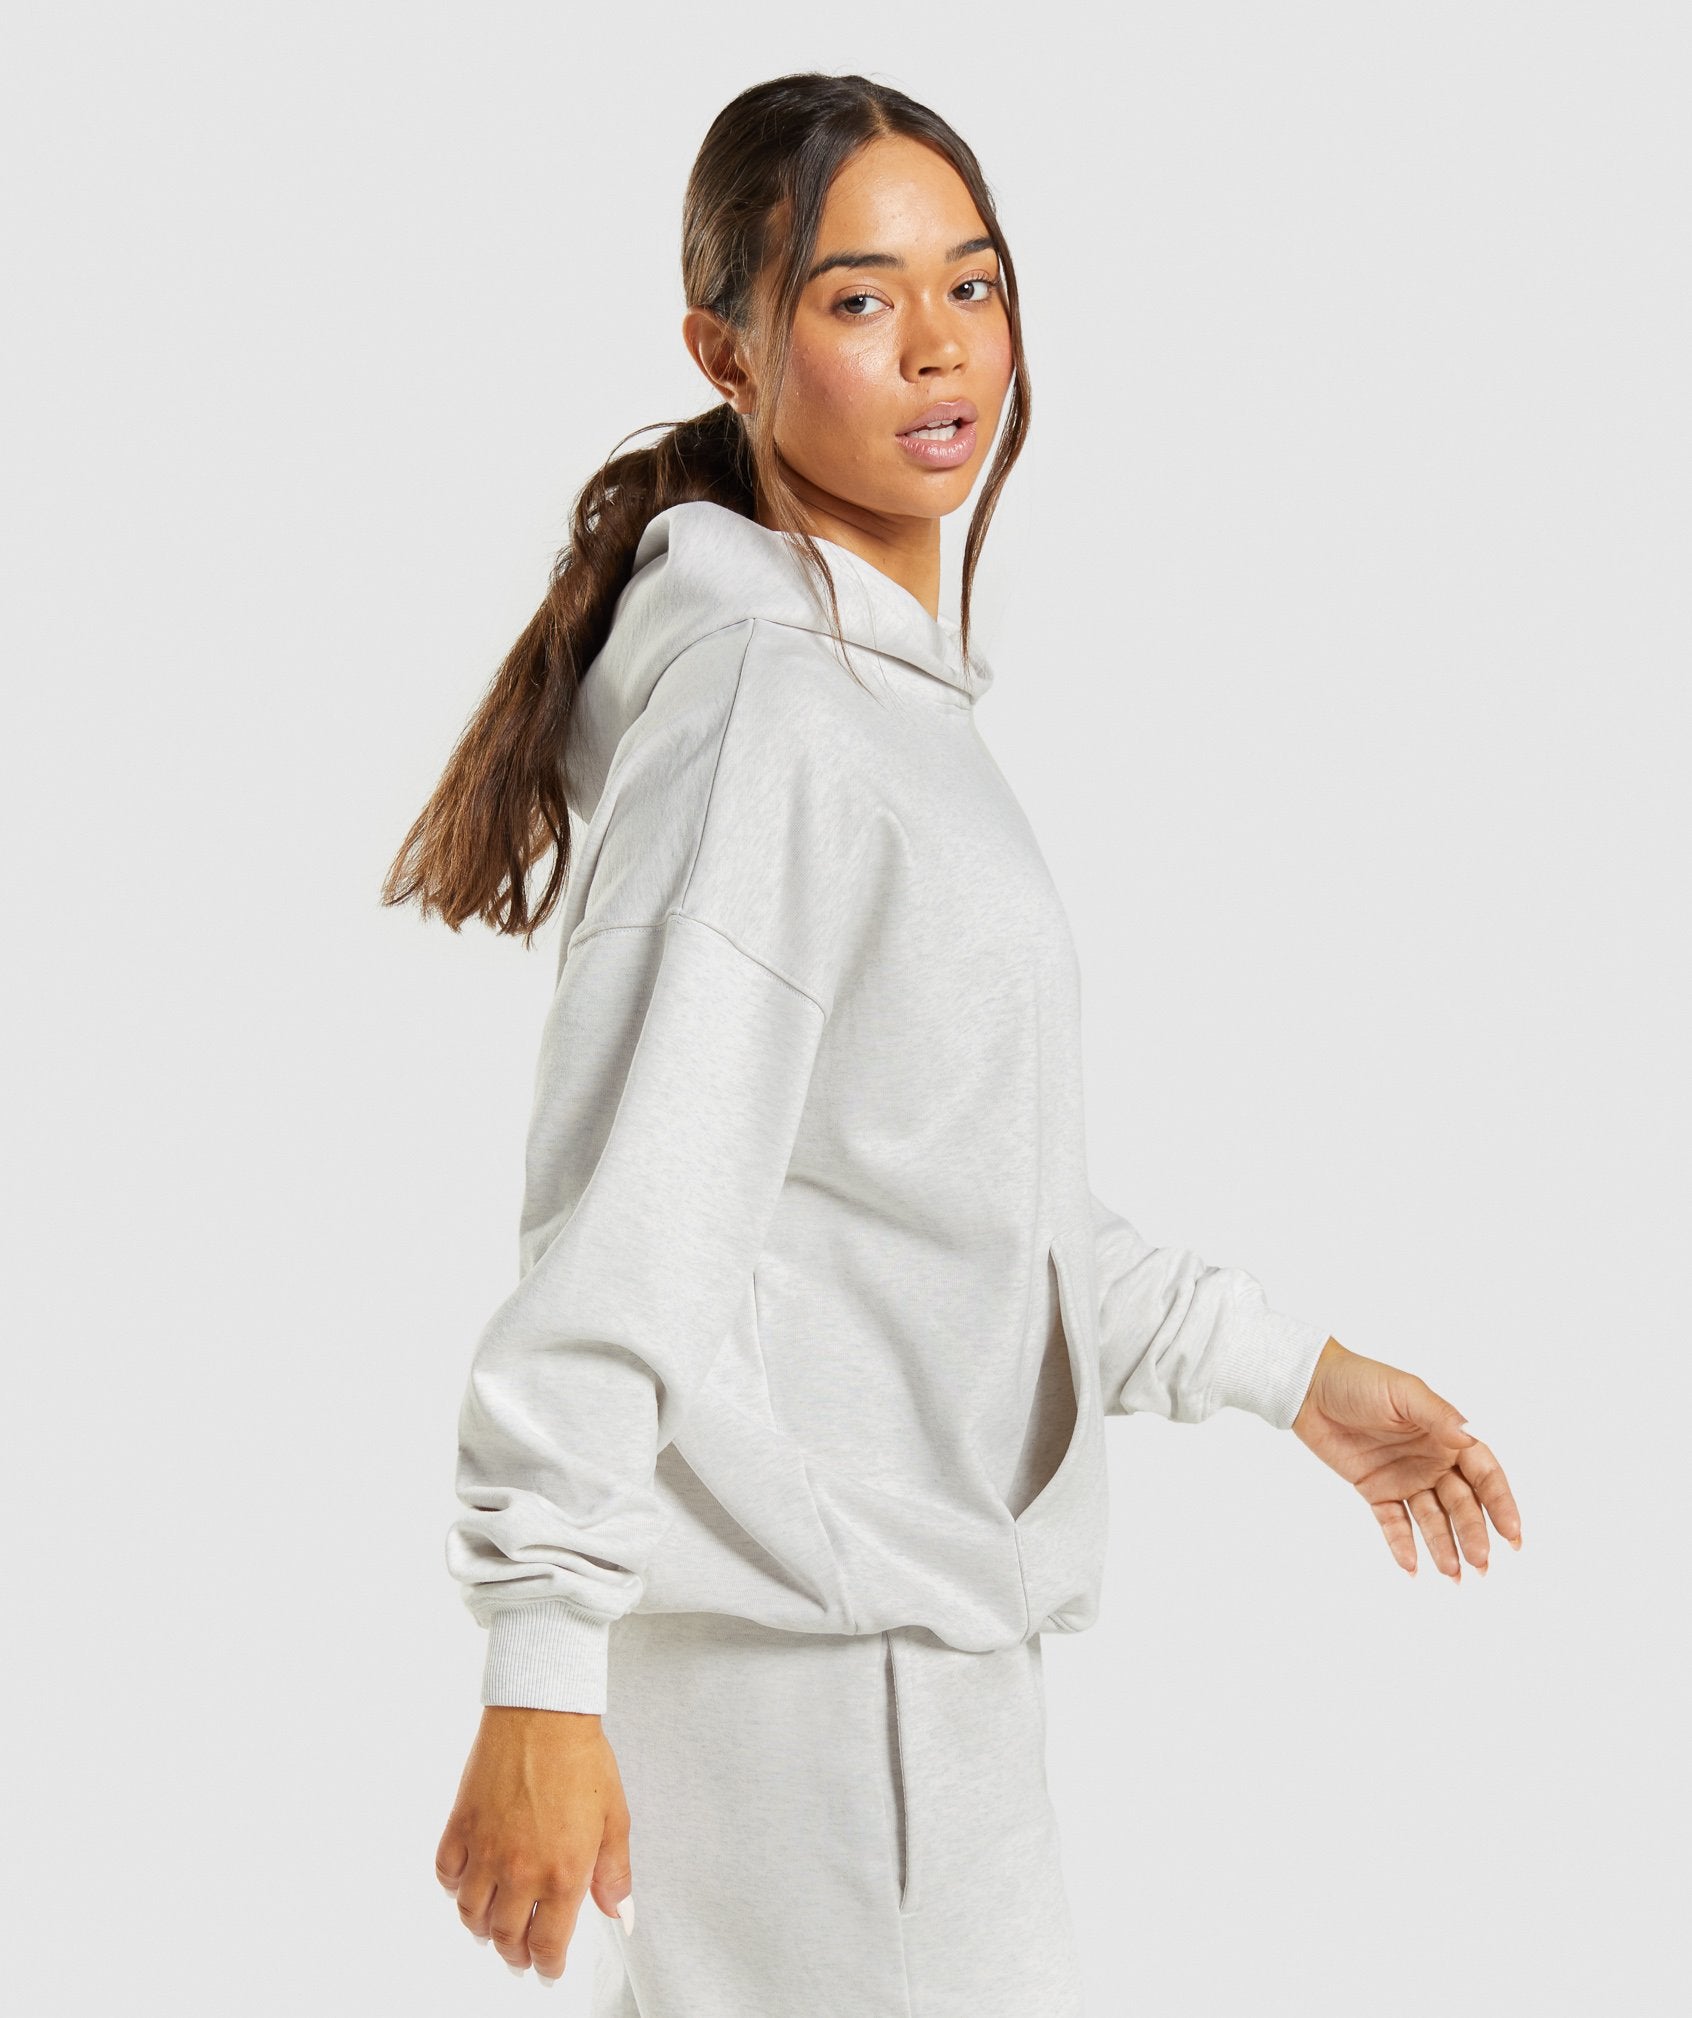 Rest Day Sweats Hoodie in White Marl - view 3